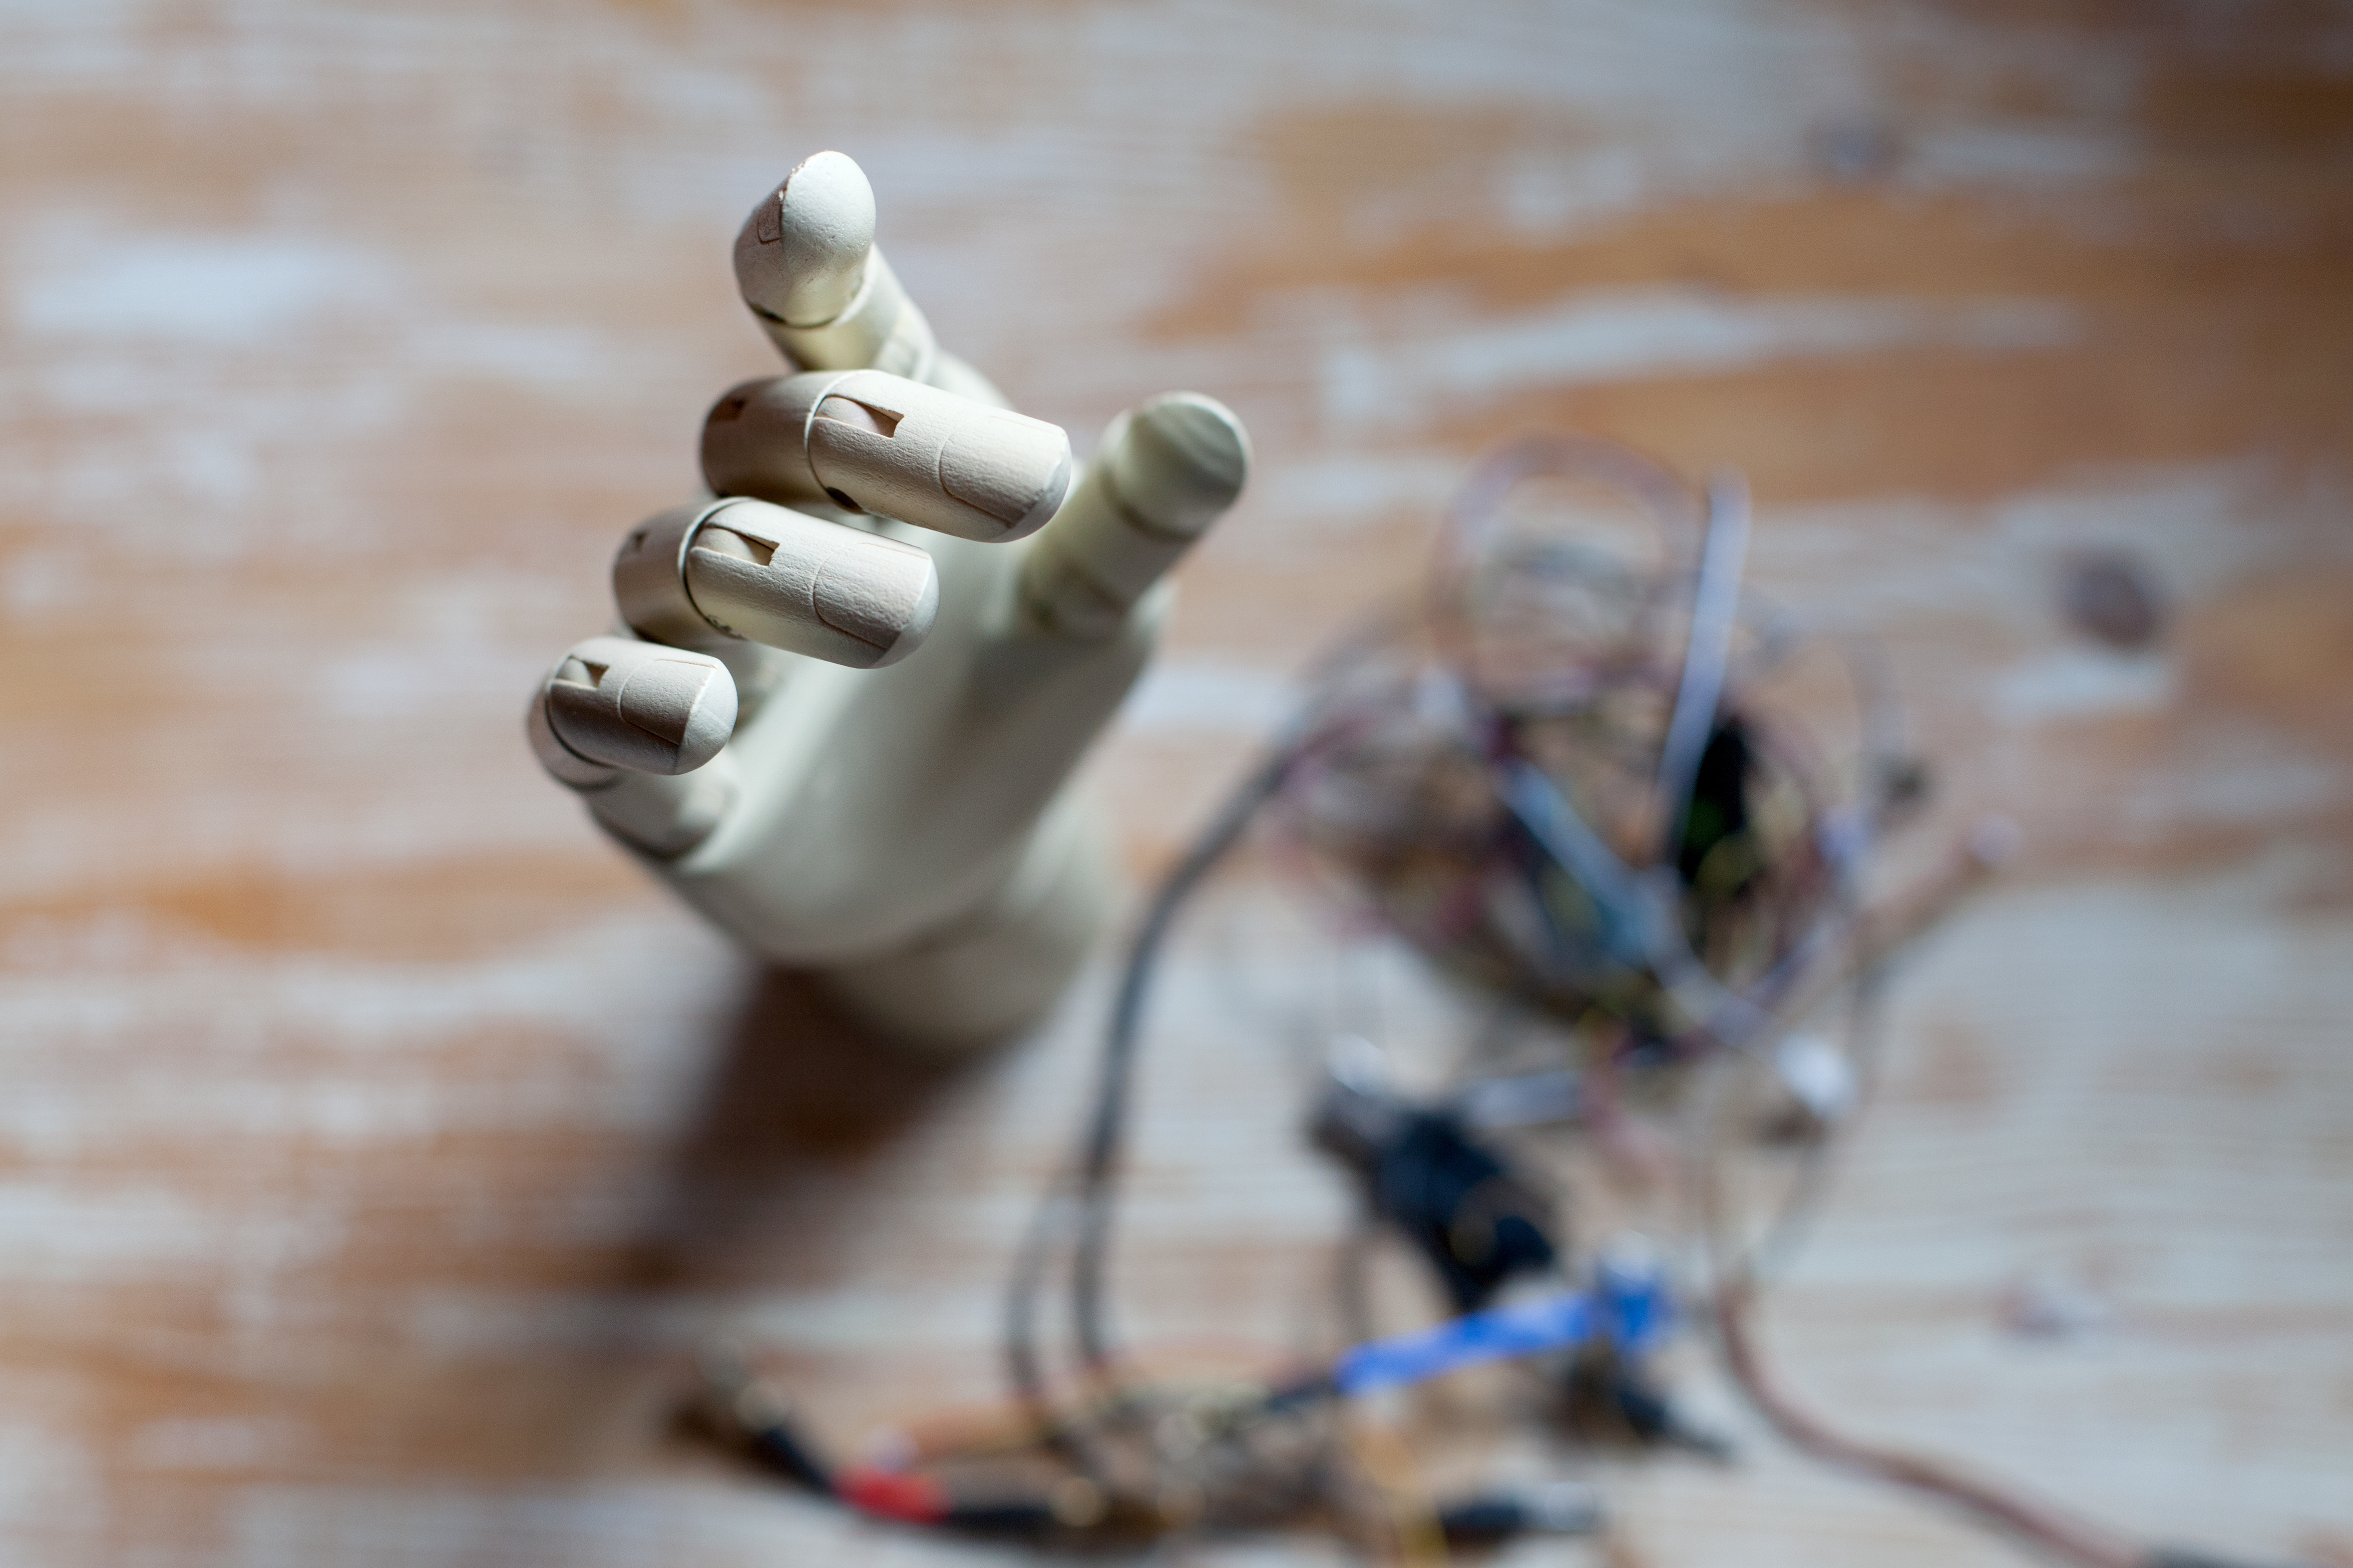 Prosthetic Devices and AI